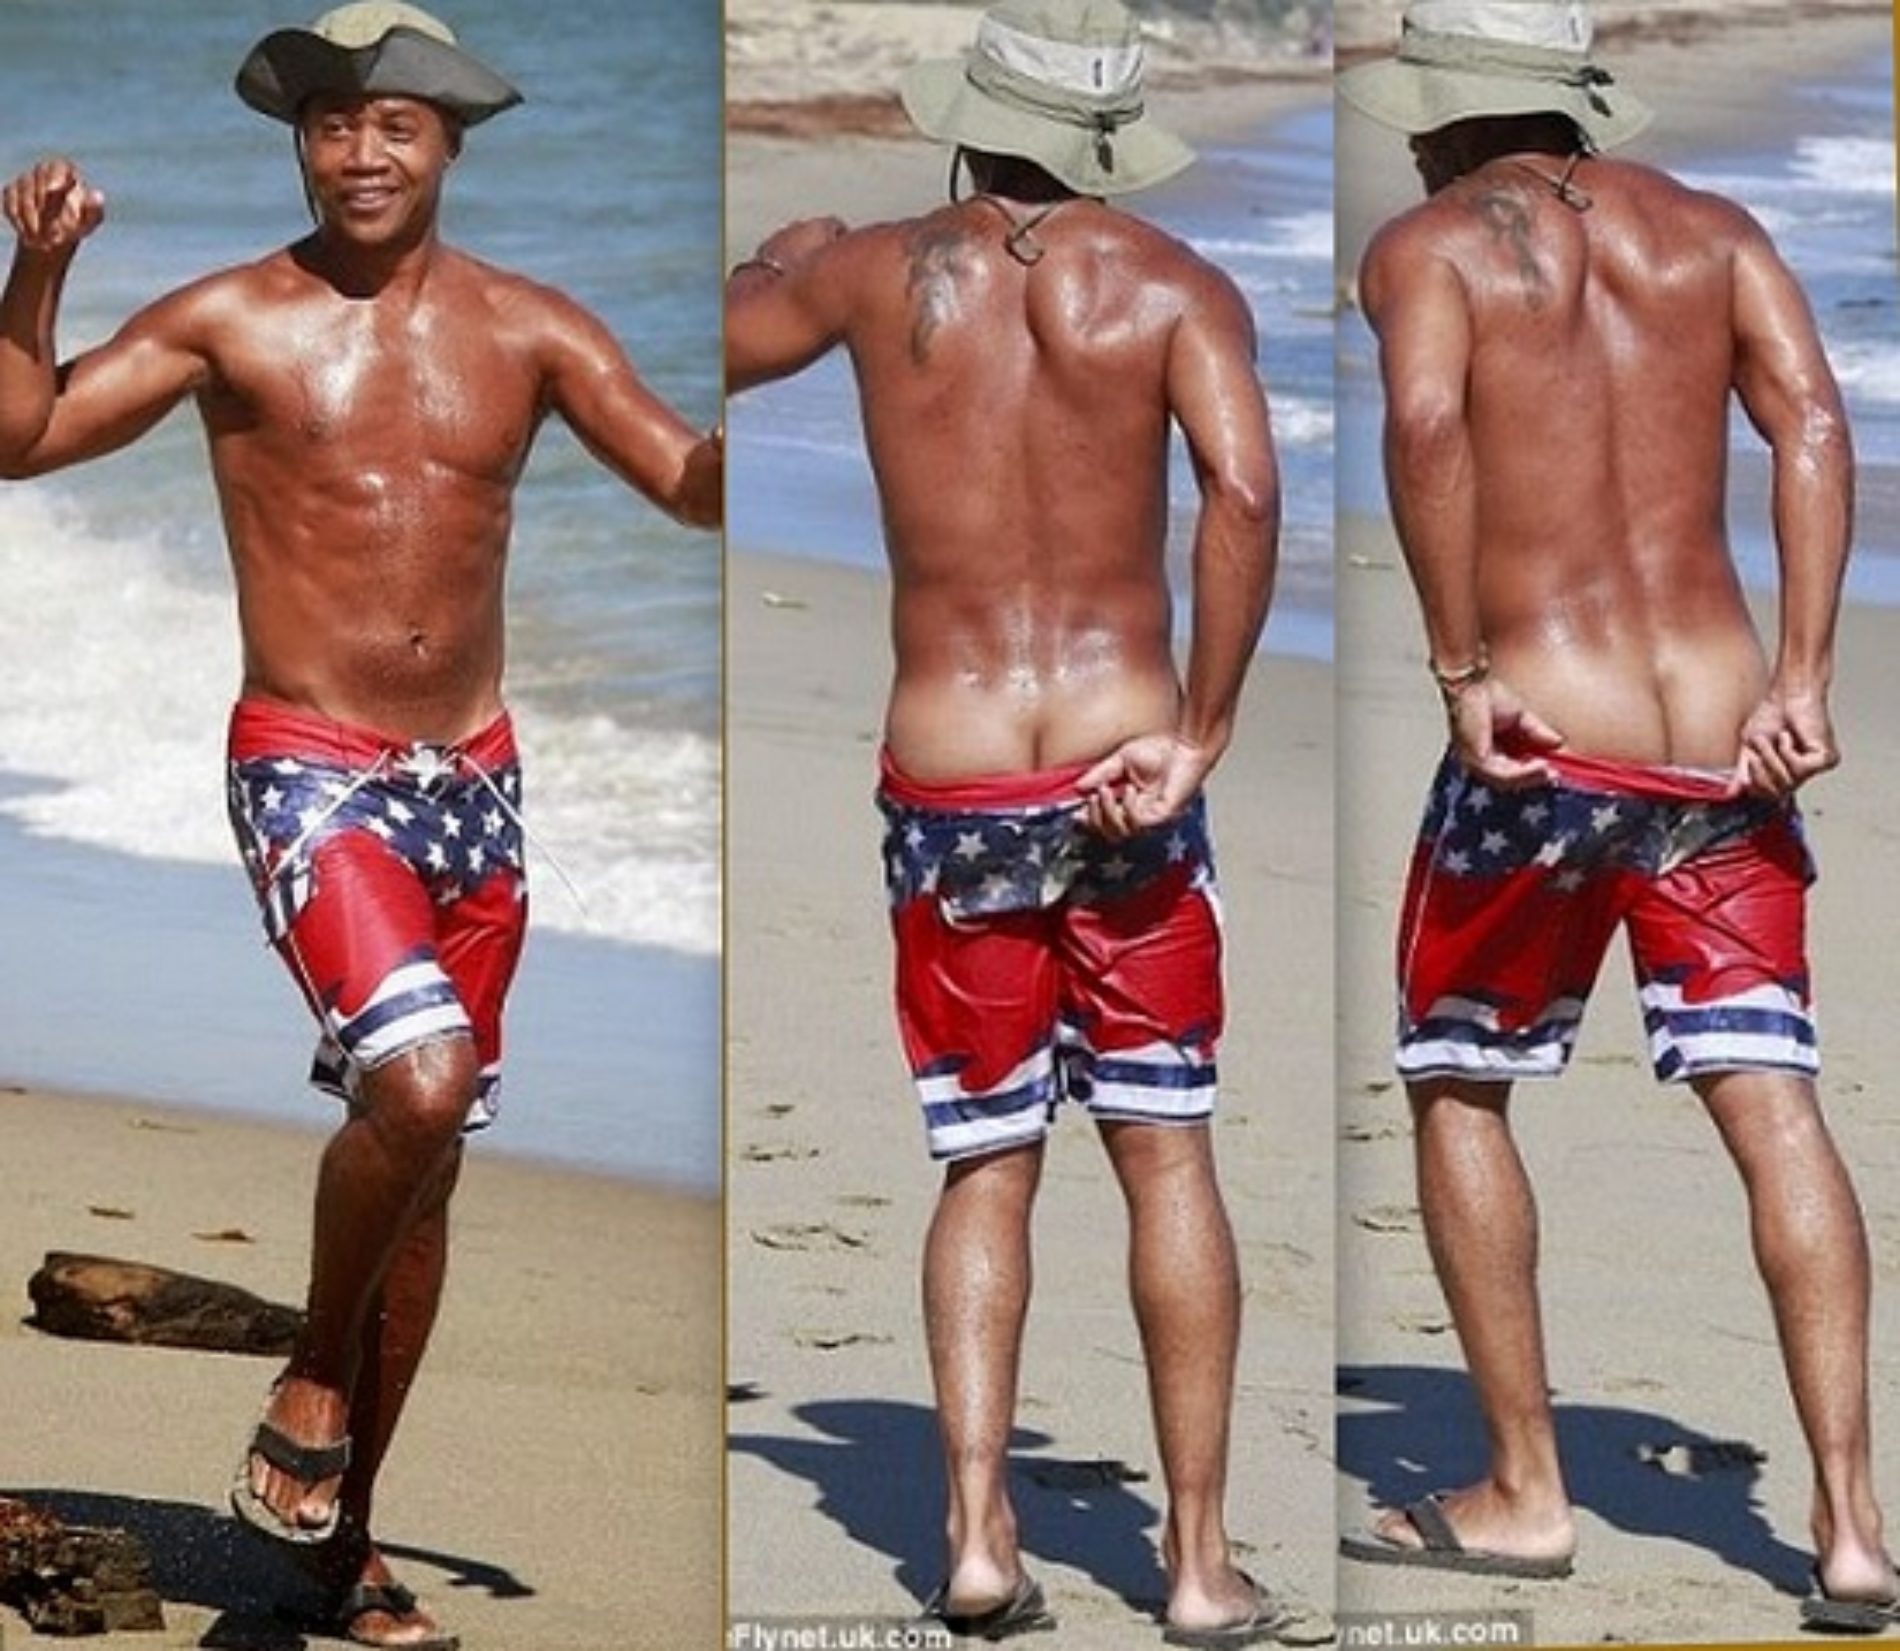 Cuba Gooding Jr. shows off some cakes during beach outing in LA.